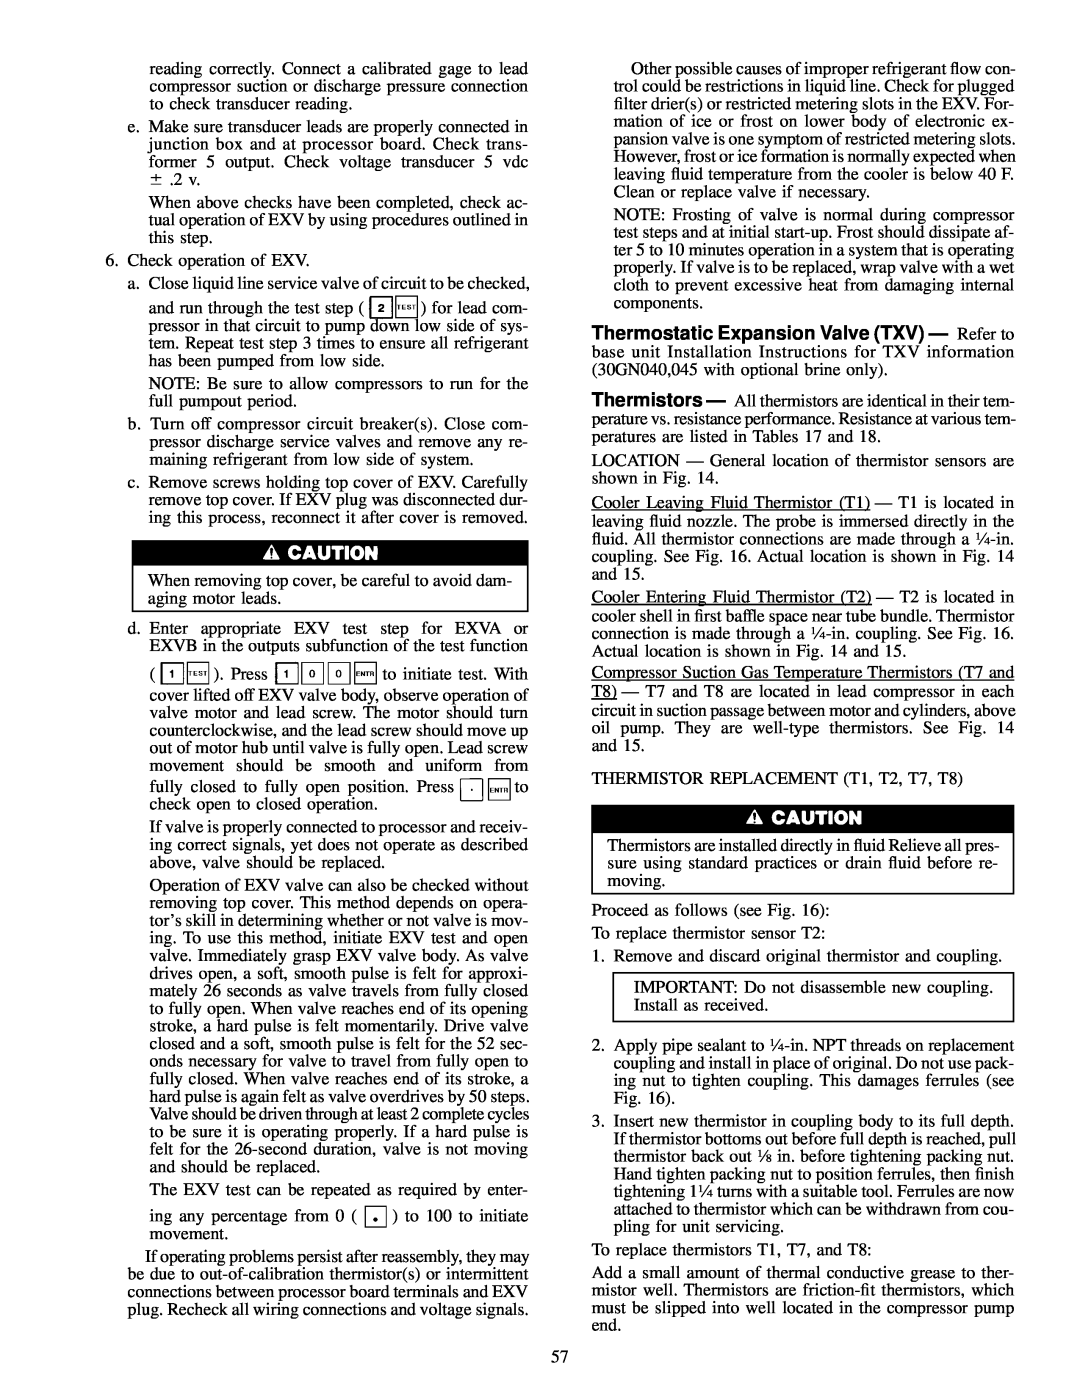 Carrier 30GN040-420 operating instructions Check operation of EXV 